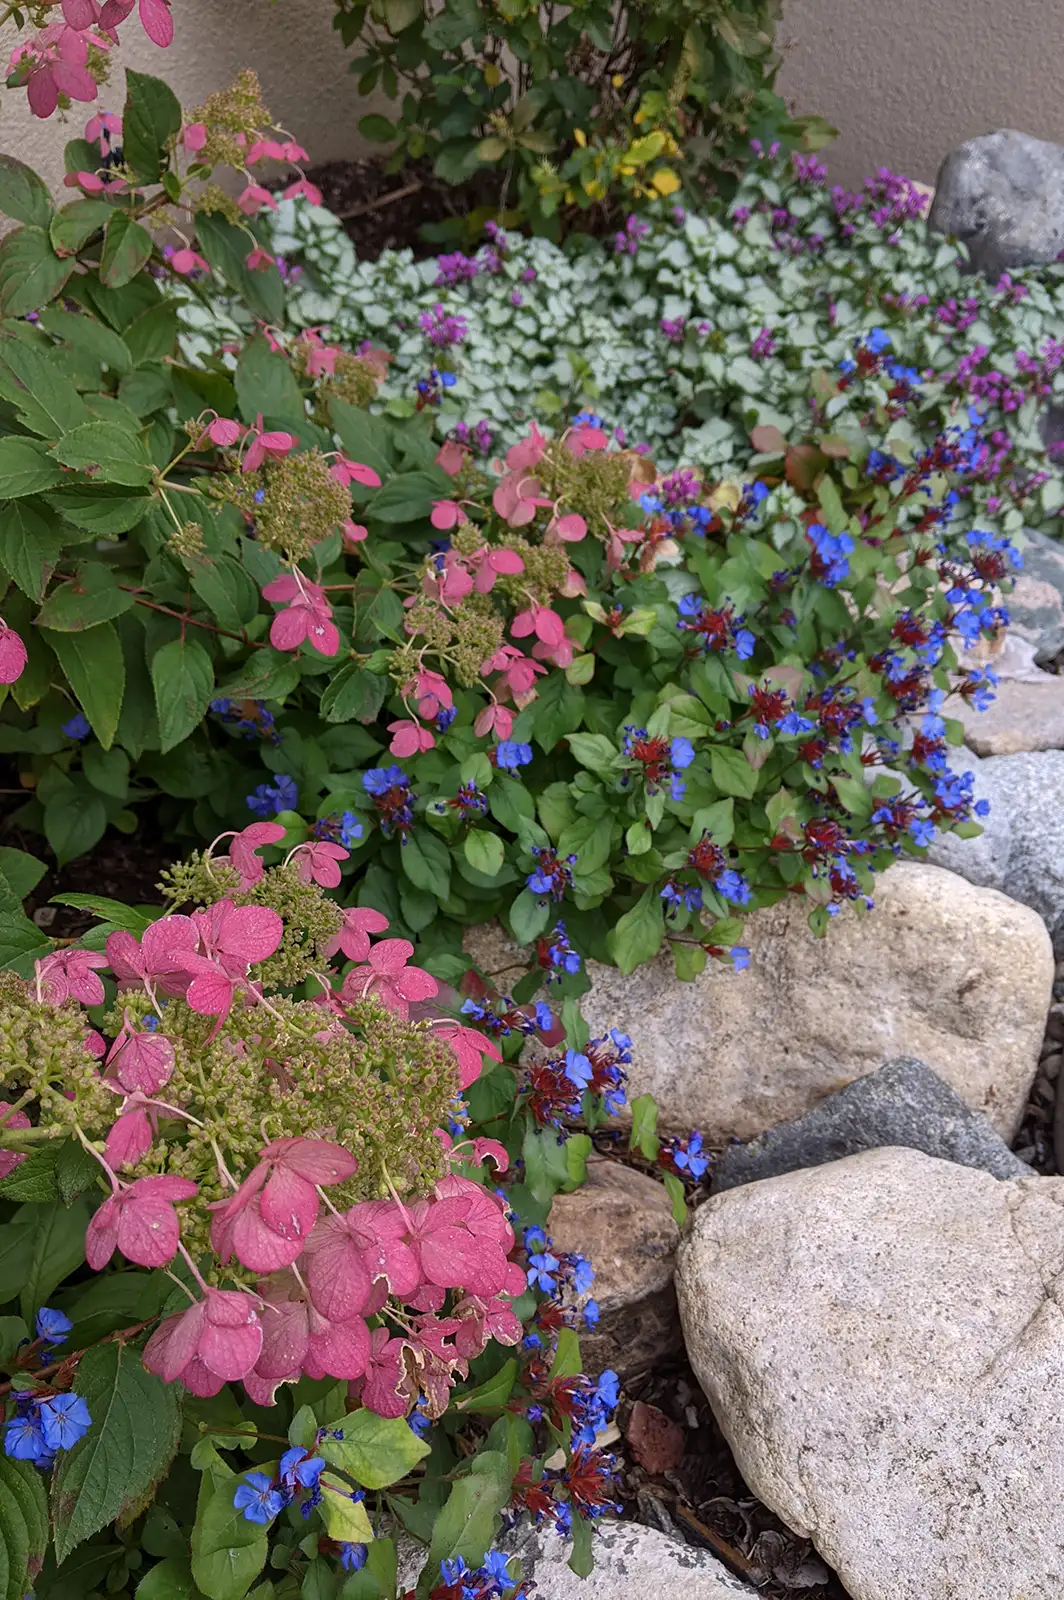 Colorful flowers scramble around the rocks in this landscape design installation